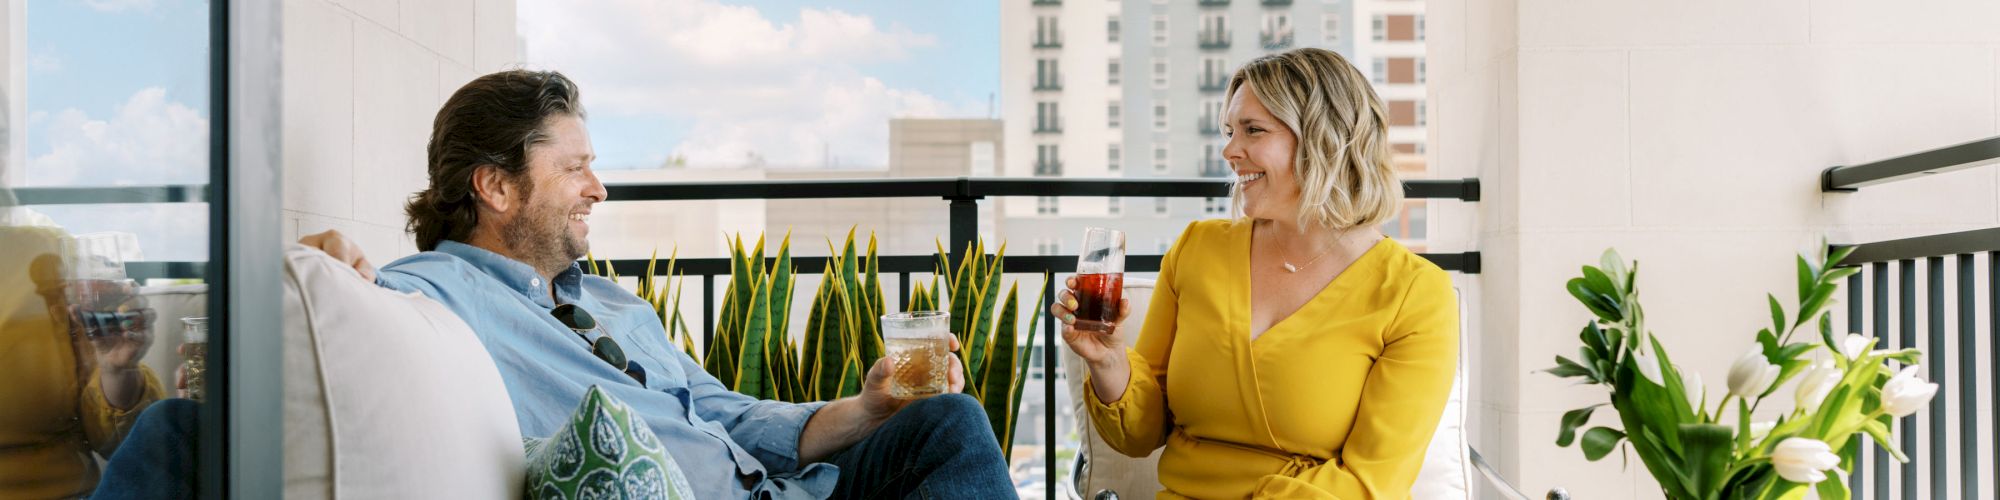 A man and a woman sit on a balcony sofa, enjoying drinks and conversation. A vase with flowers is on a table beside them, with a city view.